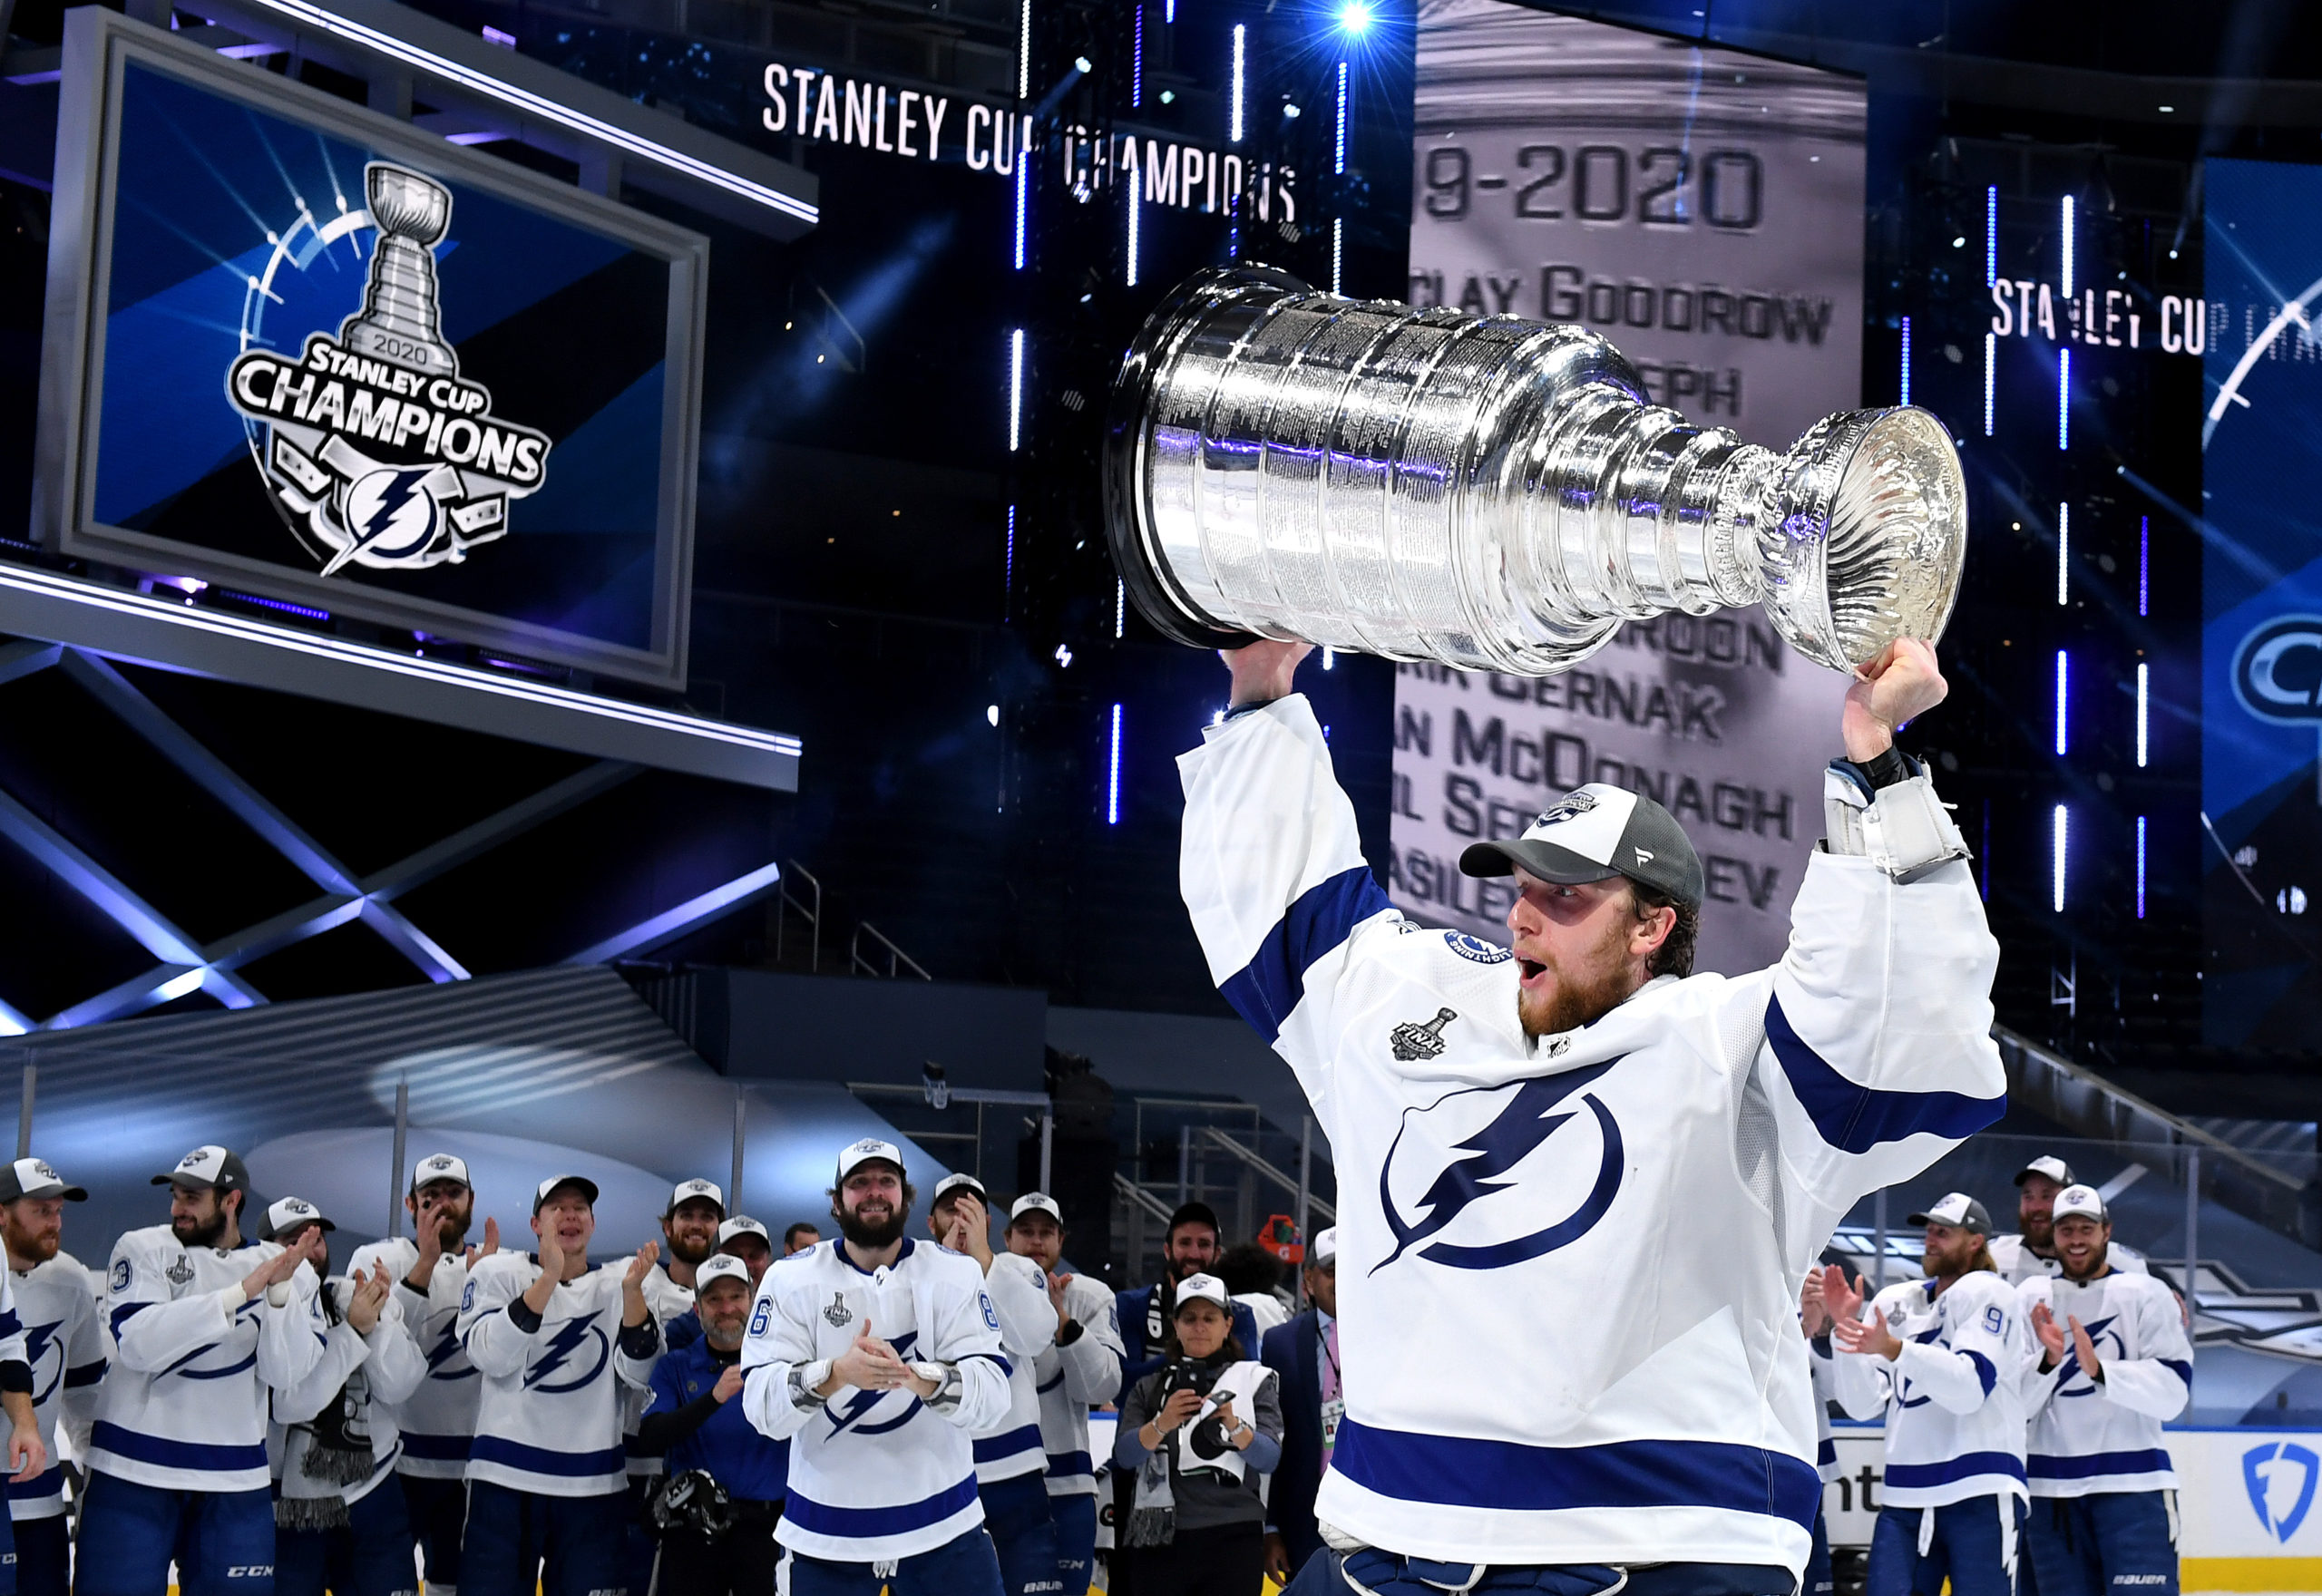 What the 2020 Stanley Cup Means for the Lightning